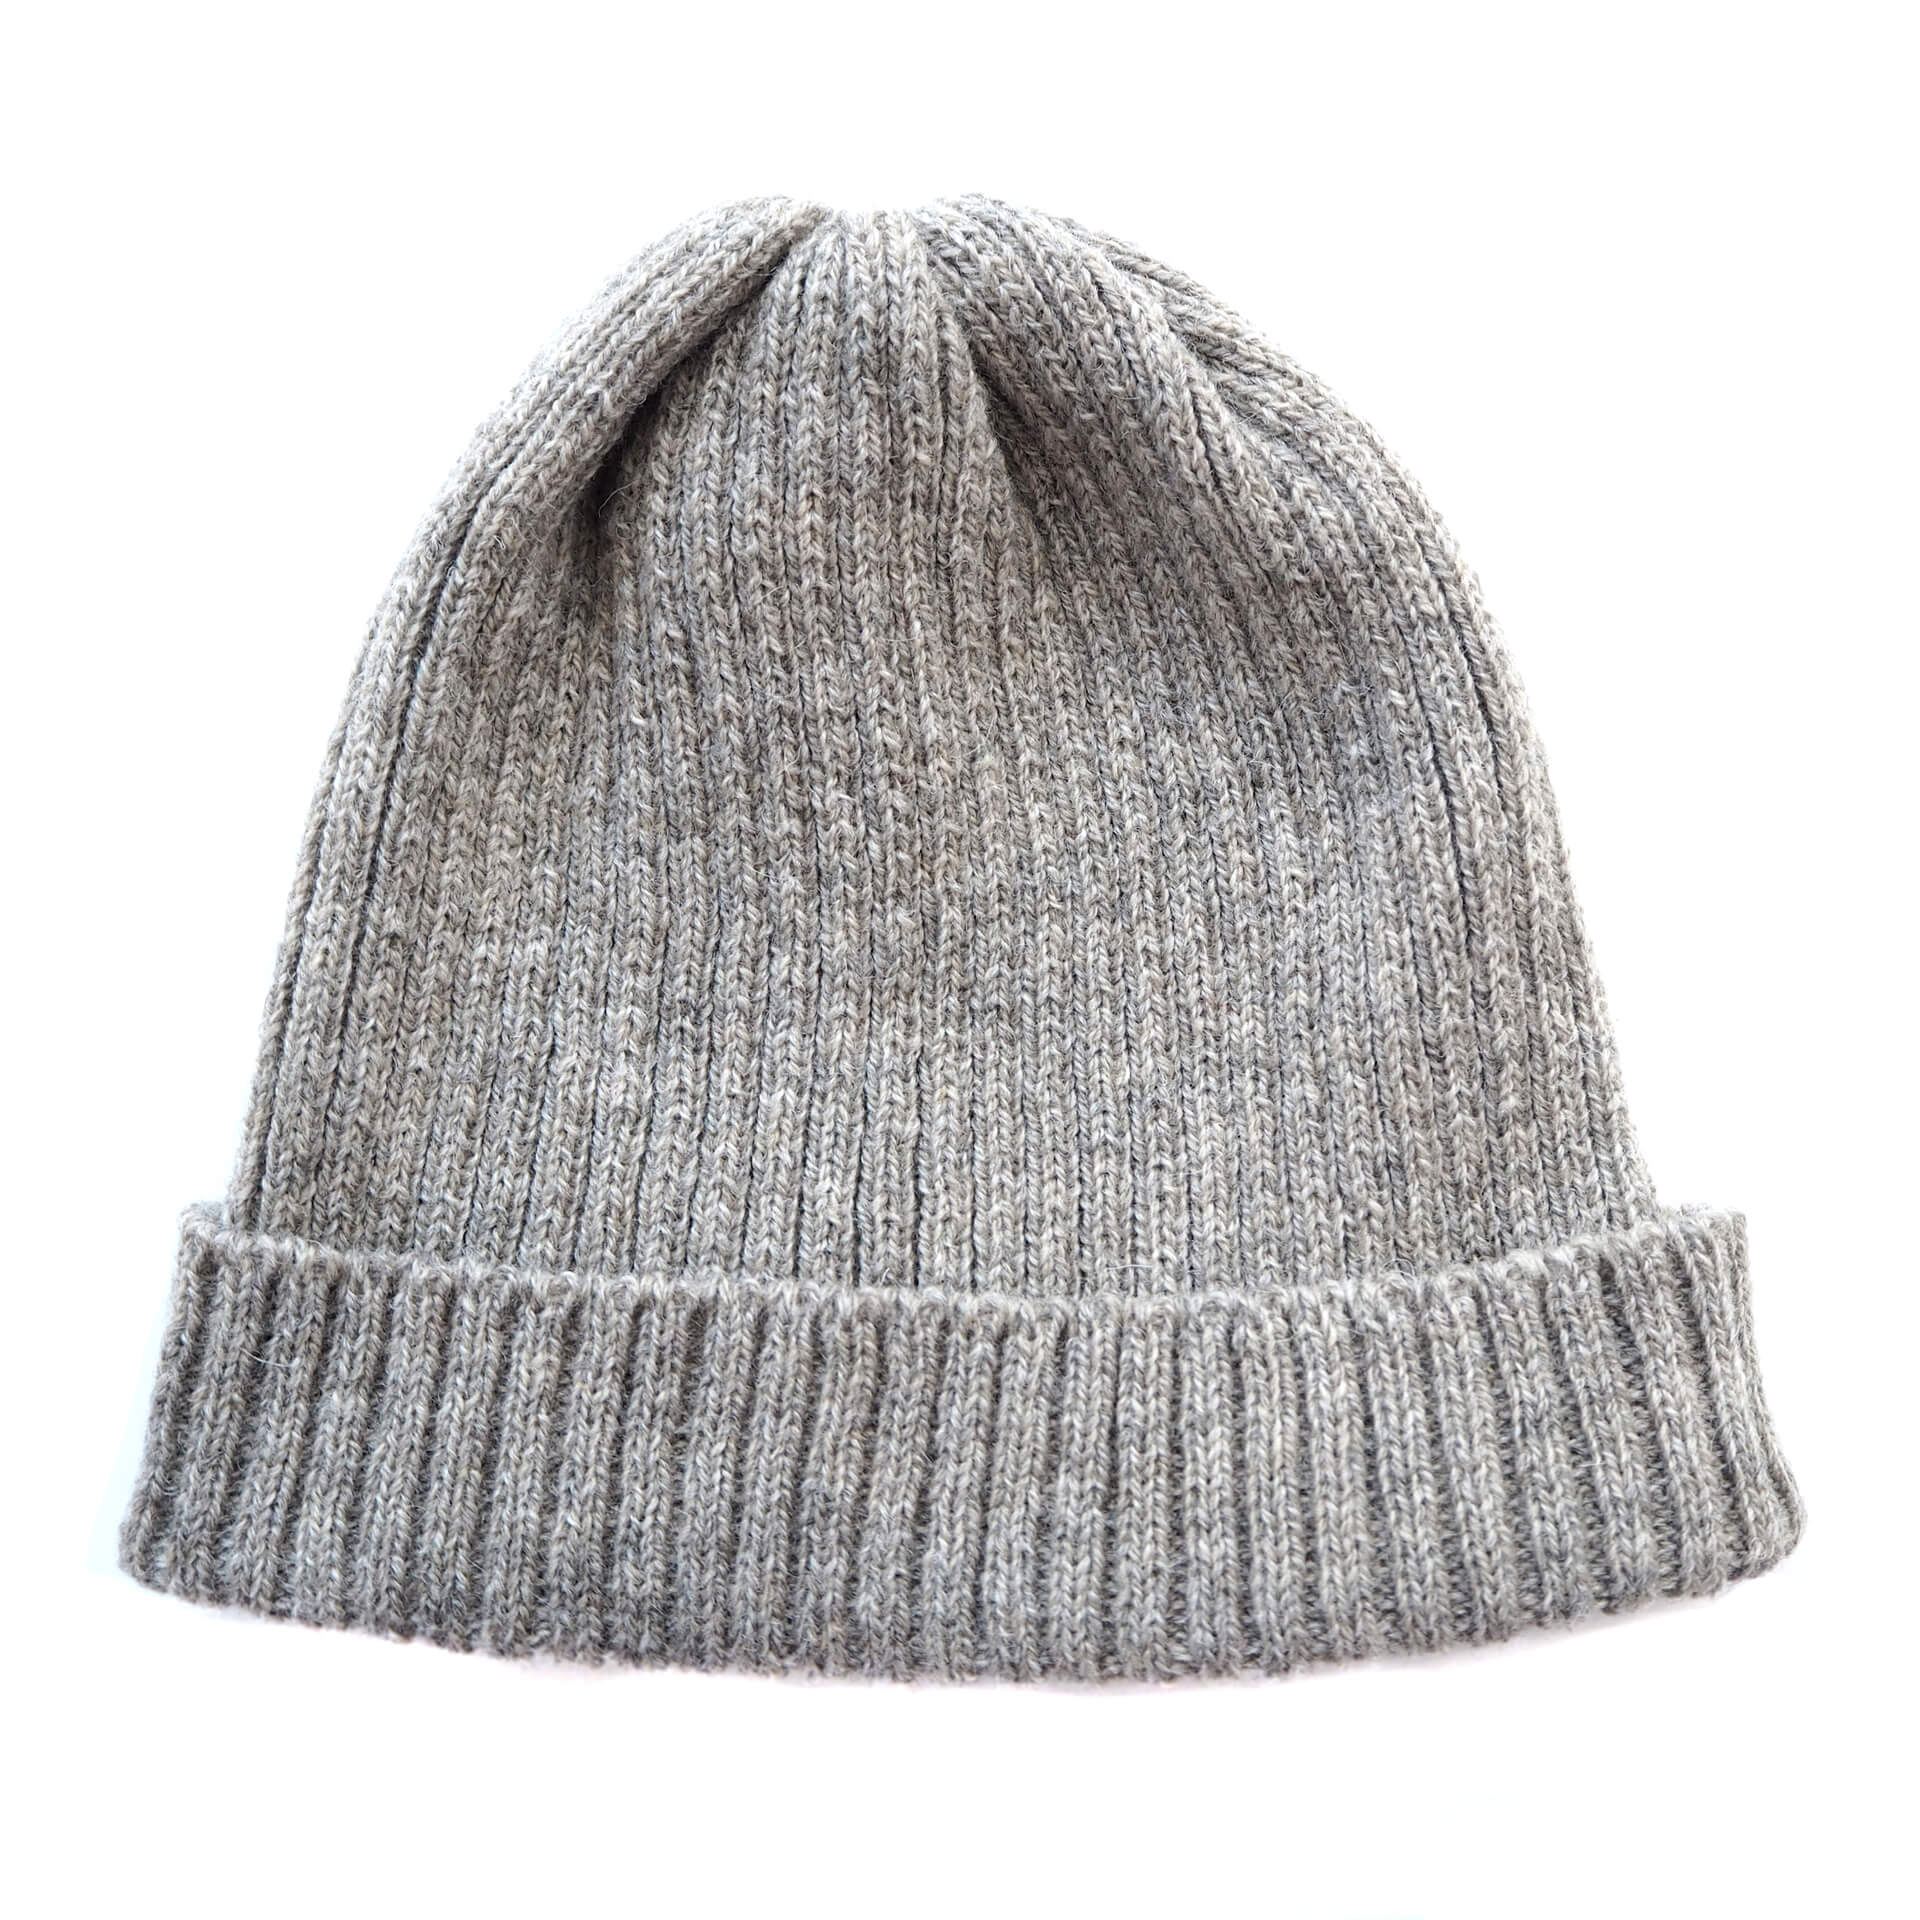 A grey ribbed beanie with a folded brim, by K.Moods. It is on a white background.